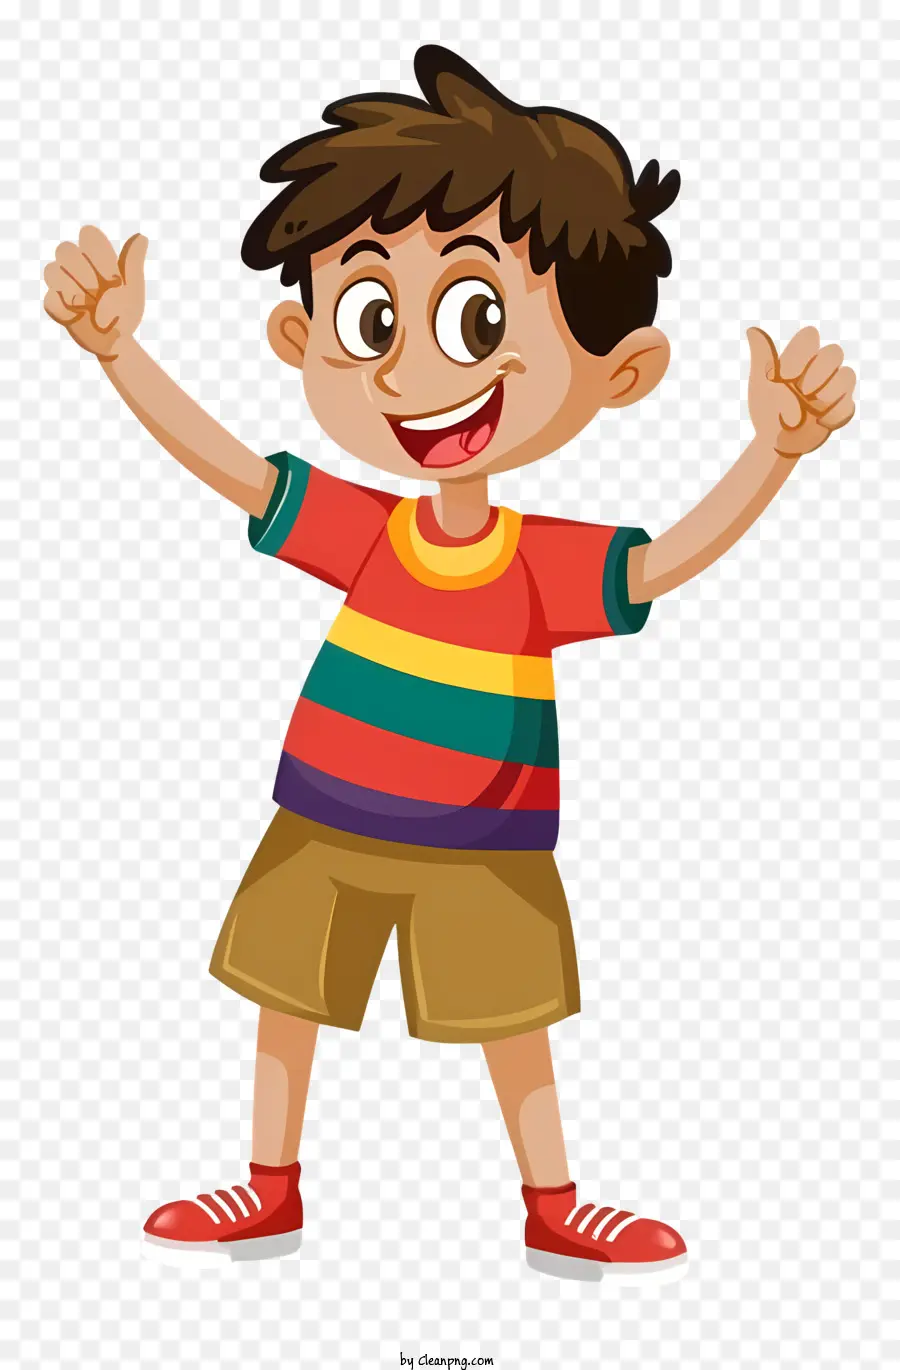 young boy brightly colored shirt brightly colored shorts waving arms excitement